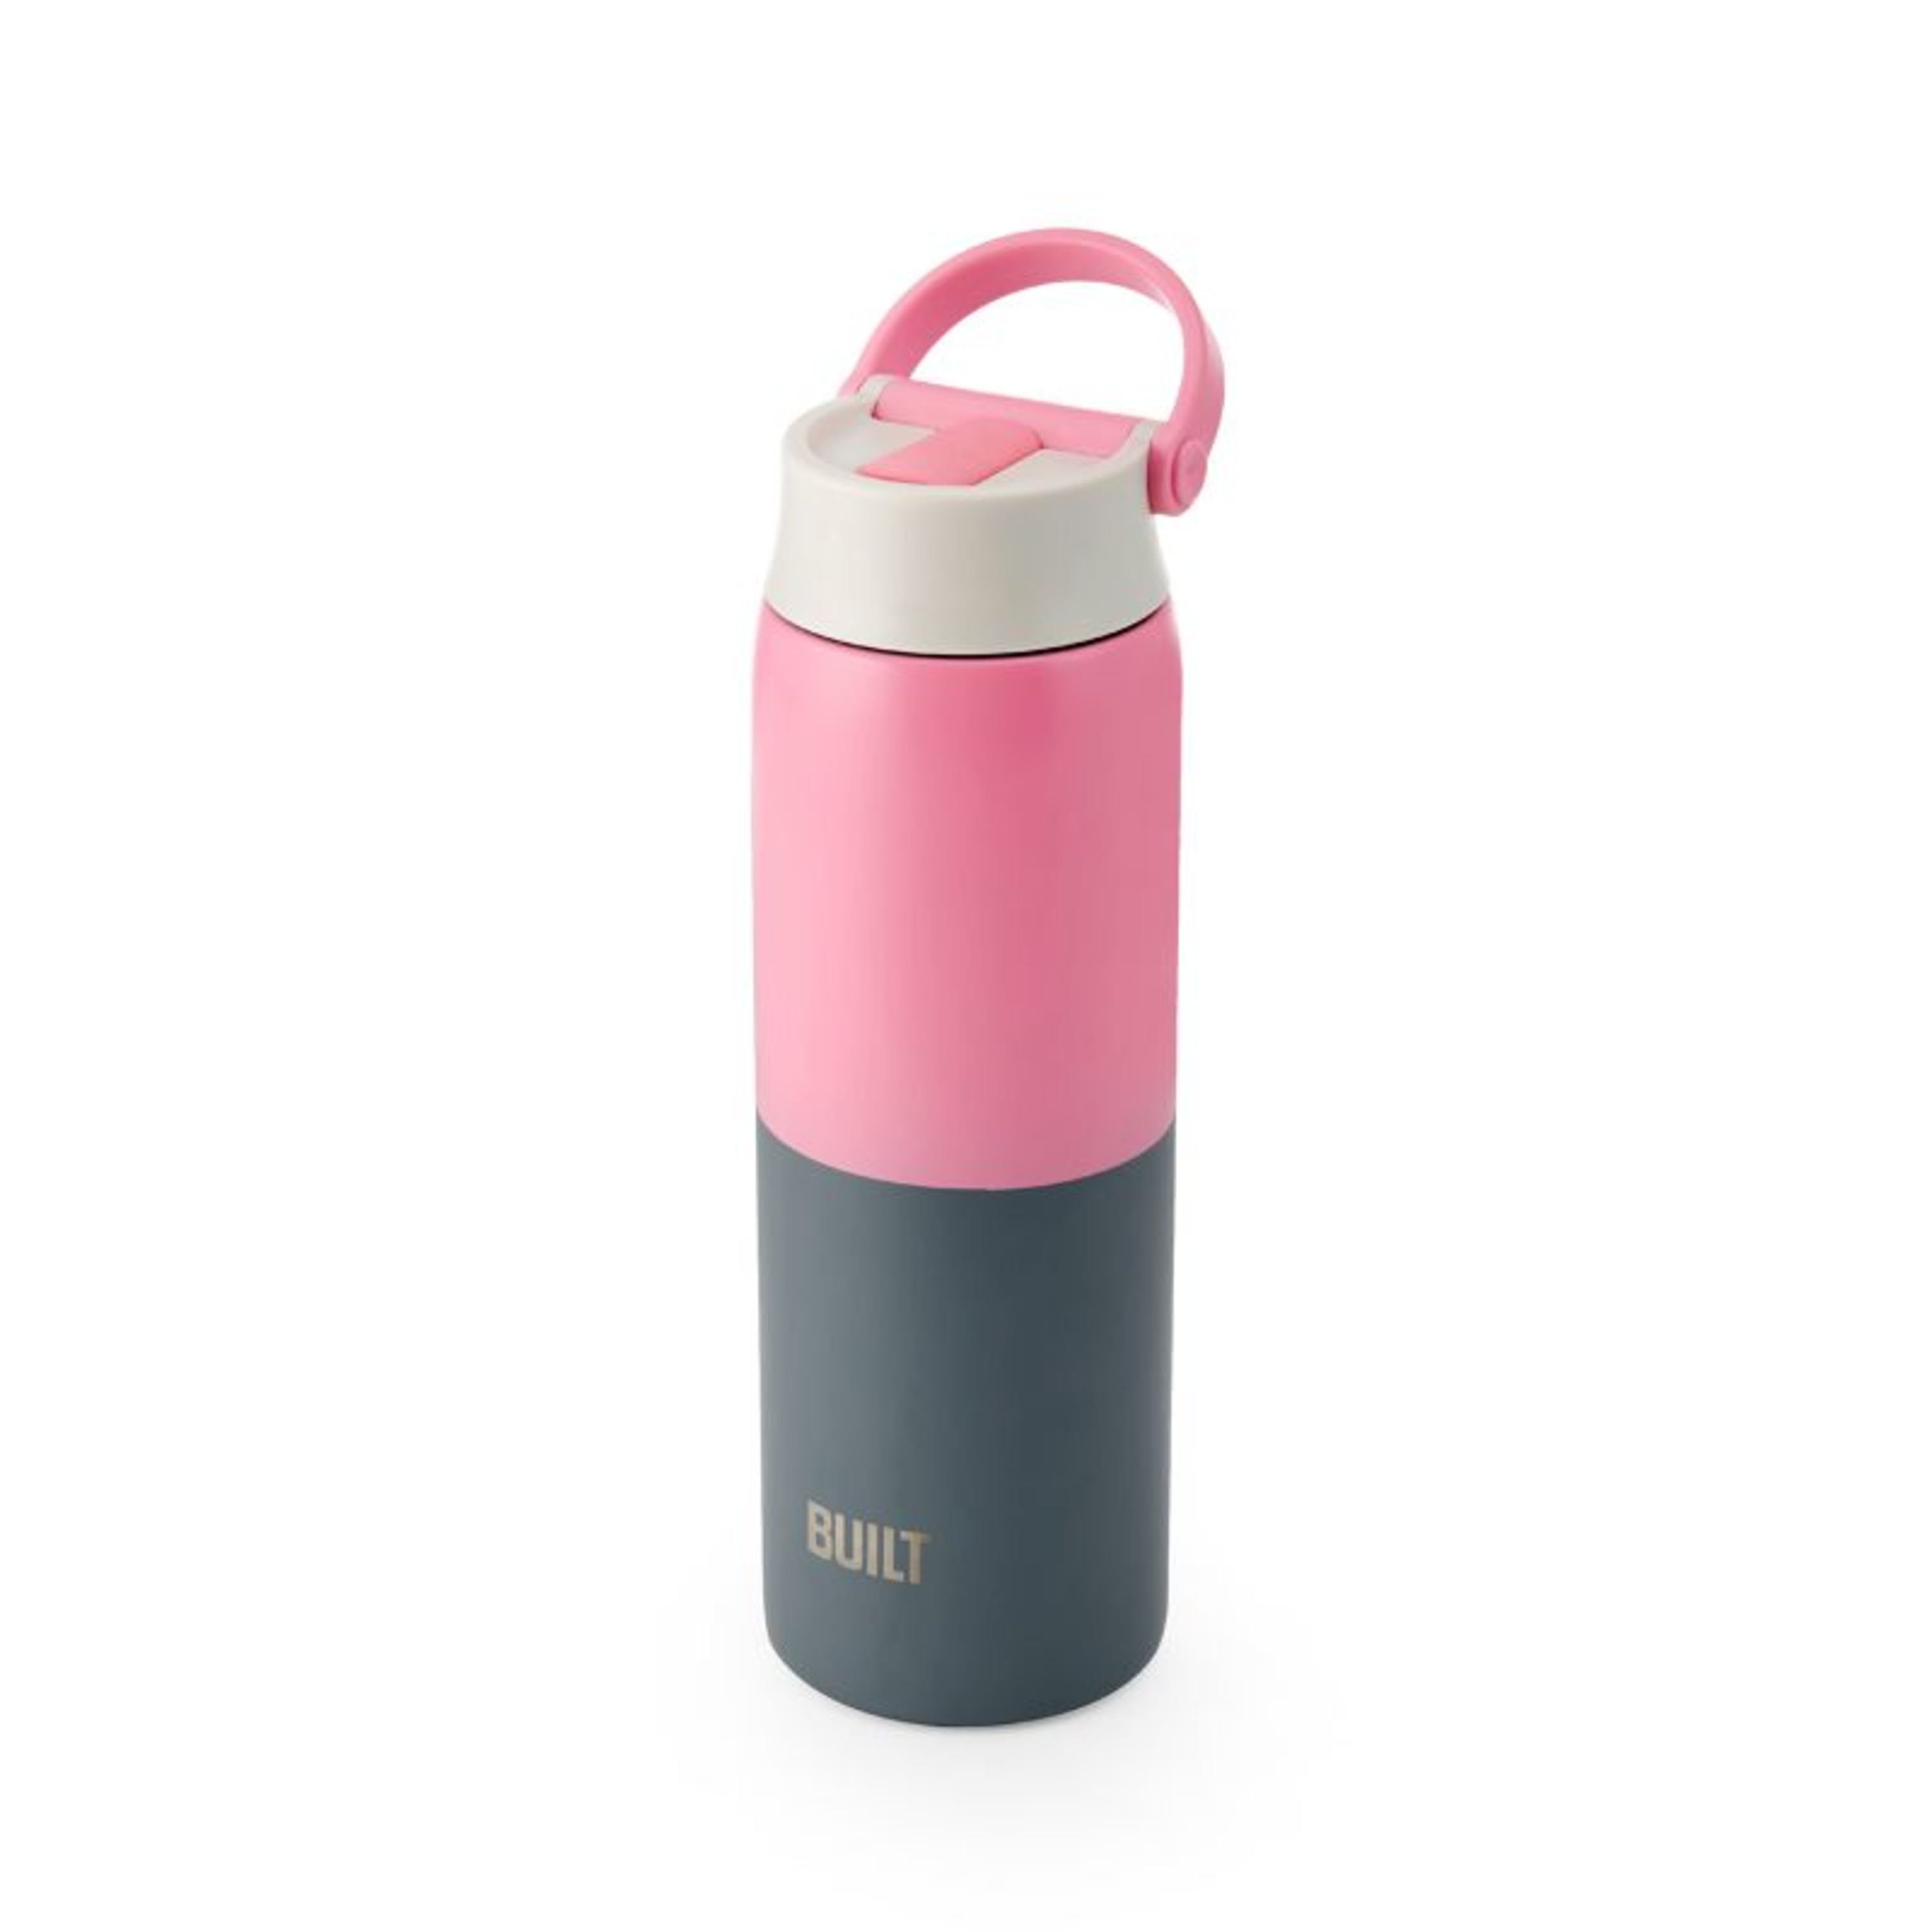 Liberty 20 oz. Berry Insulated Stainless Steel Water Bottle with D-Ring Lid, Pink